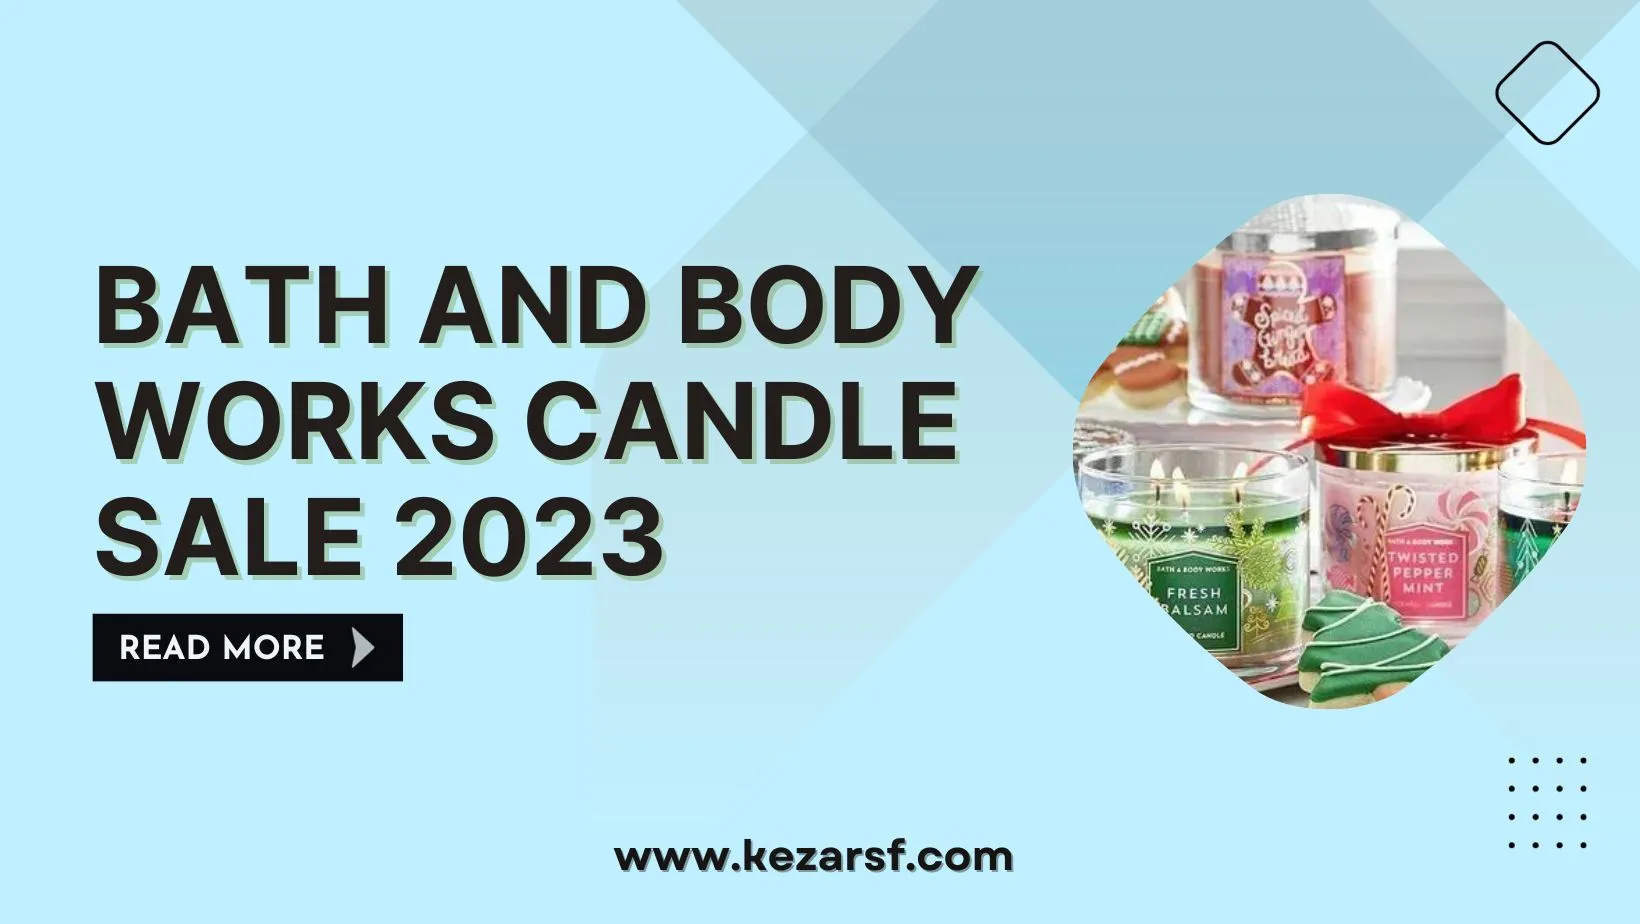 Bath and Body Works Candle Sale 2023